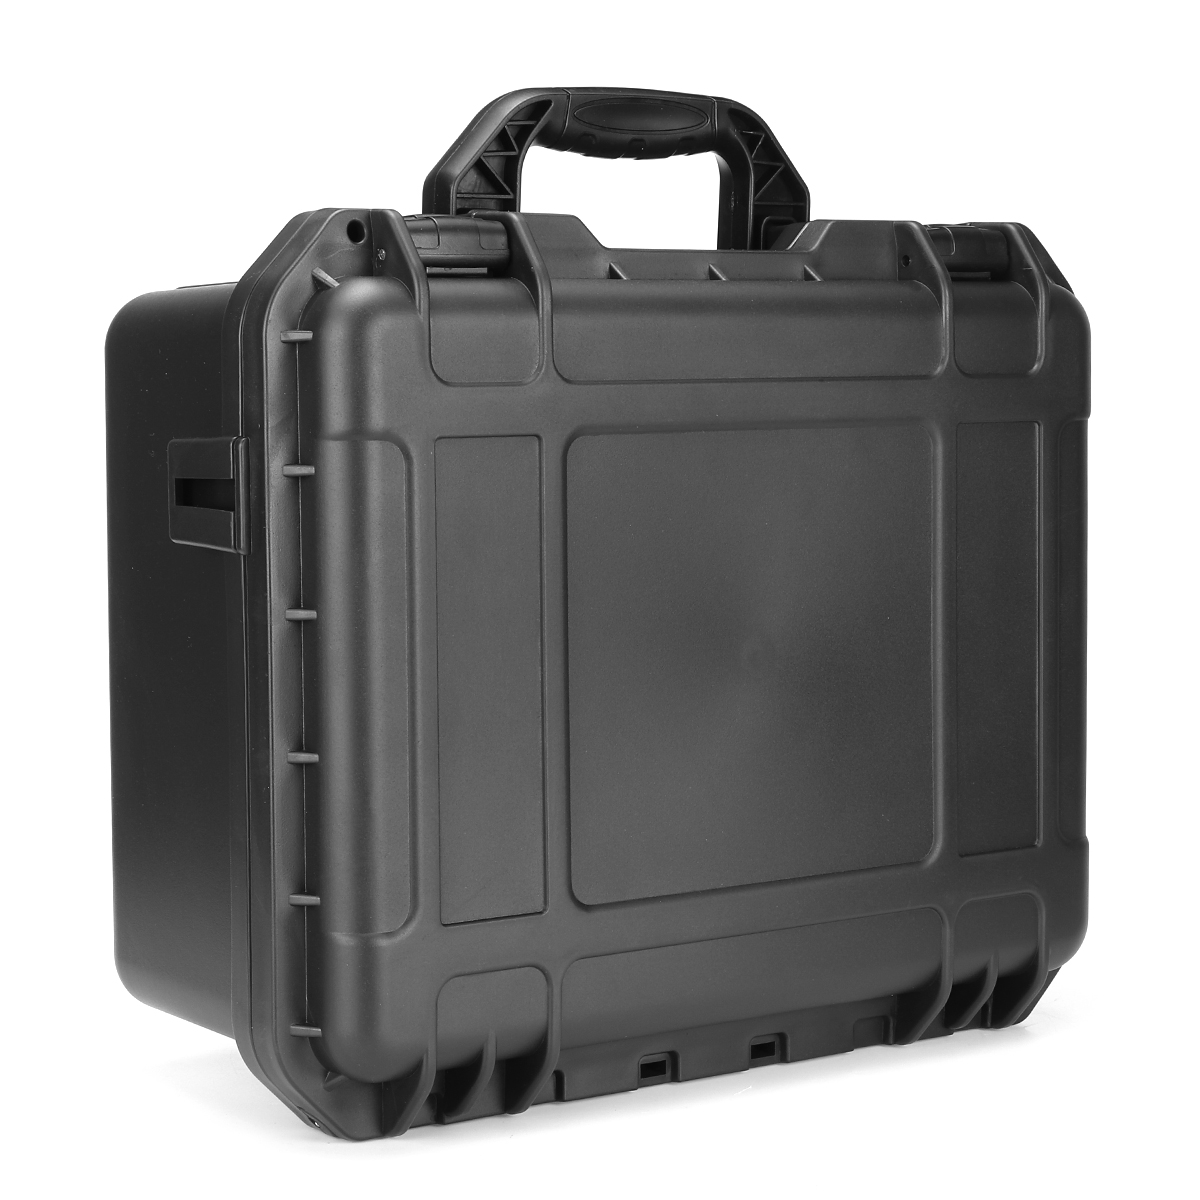 Find 1PC Shockproof Sealed Safety Case Toolbox Airtight Waterproof Tool Box Instrument Case Dry Box with Pre-cut Foam Lockable for Sale on Gipsybee.com with cryptocurrencies